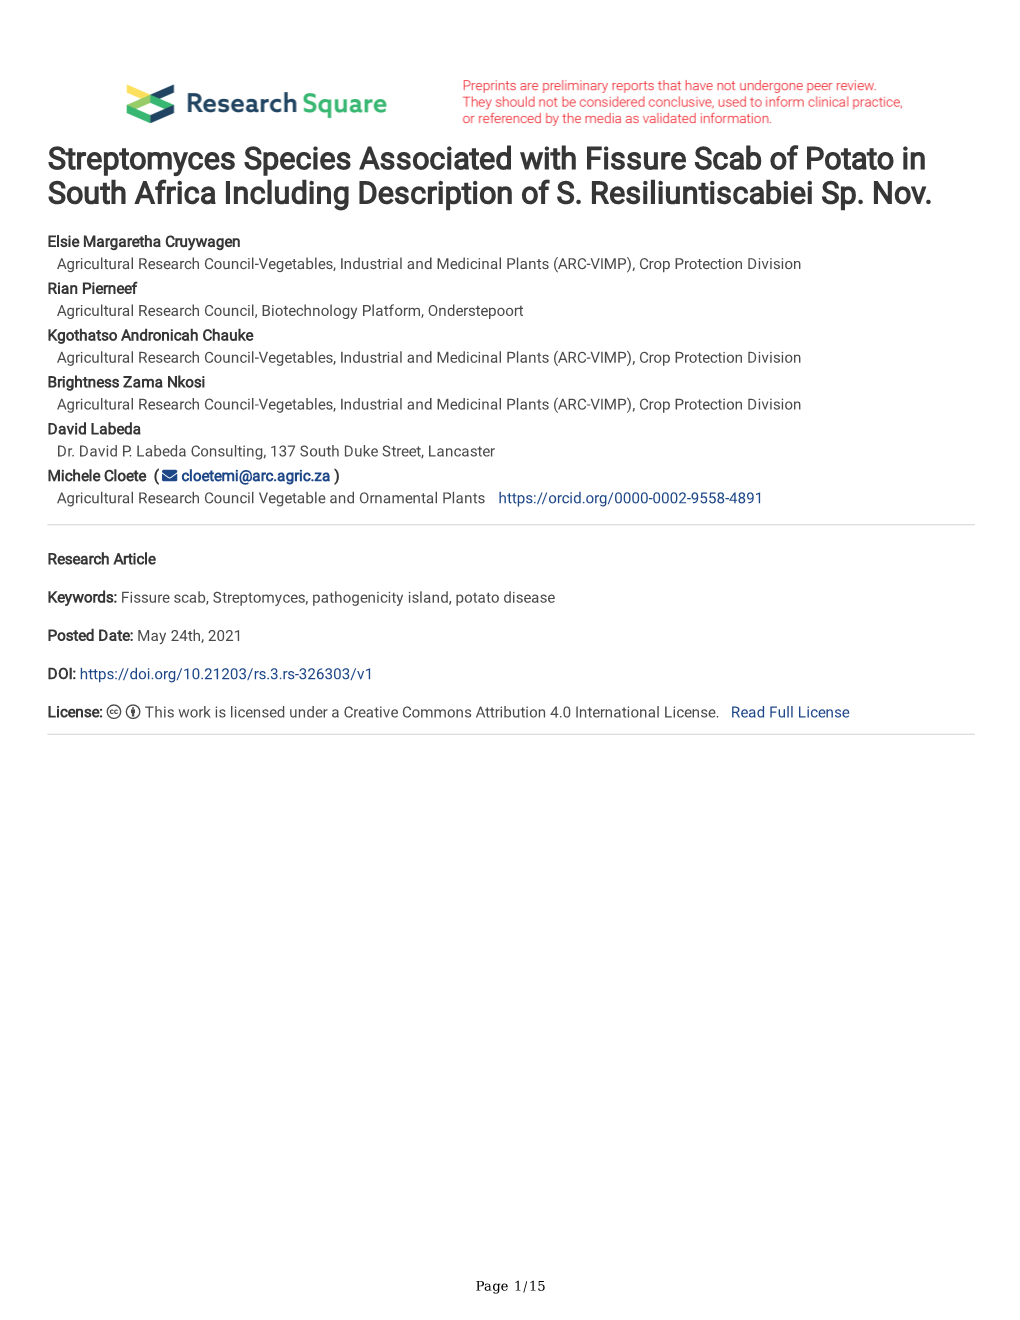 Streptomyces Species Associated with Fissure Scab of Potato in South Africa Including Description of S